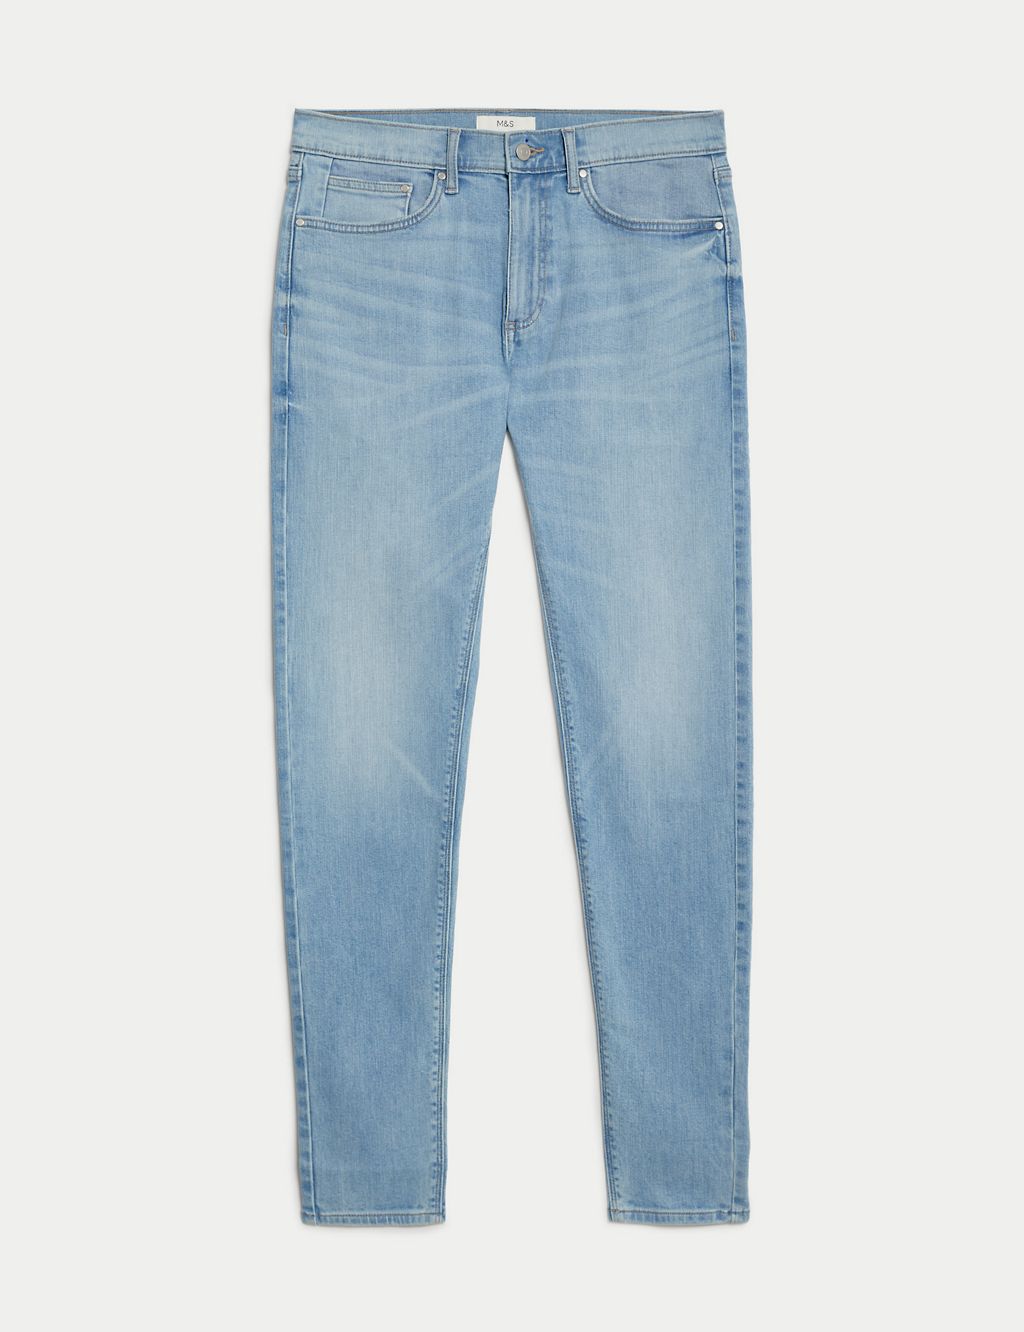 Skinny Fit Stretch Jeans 1 of 5